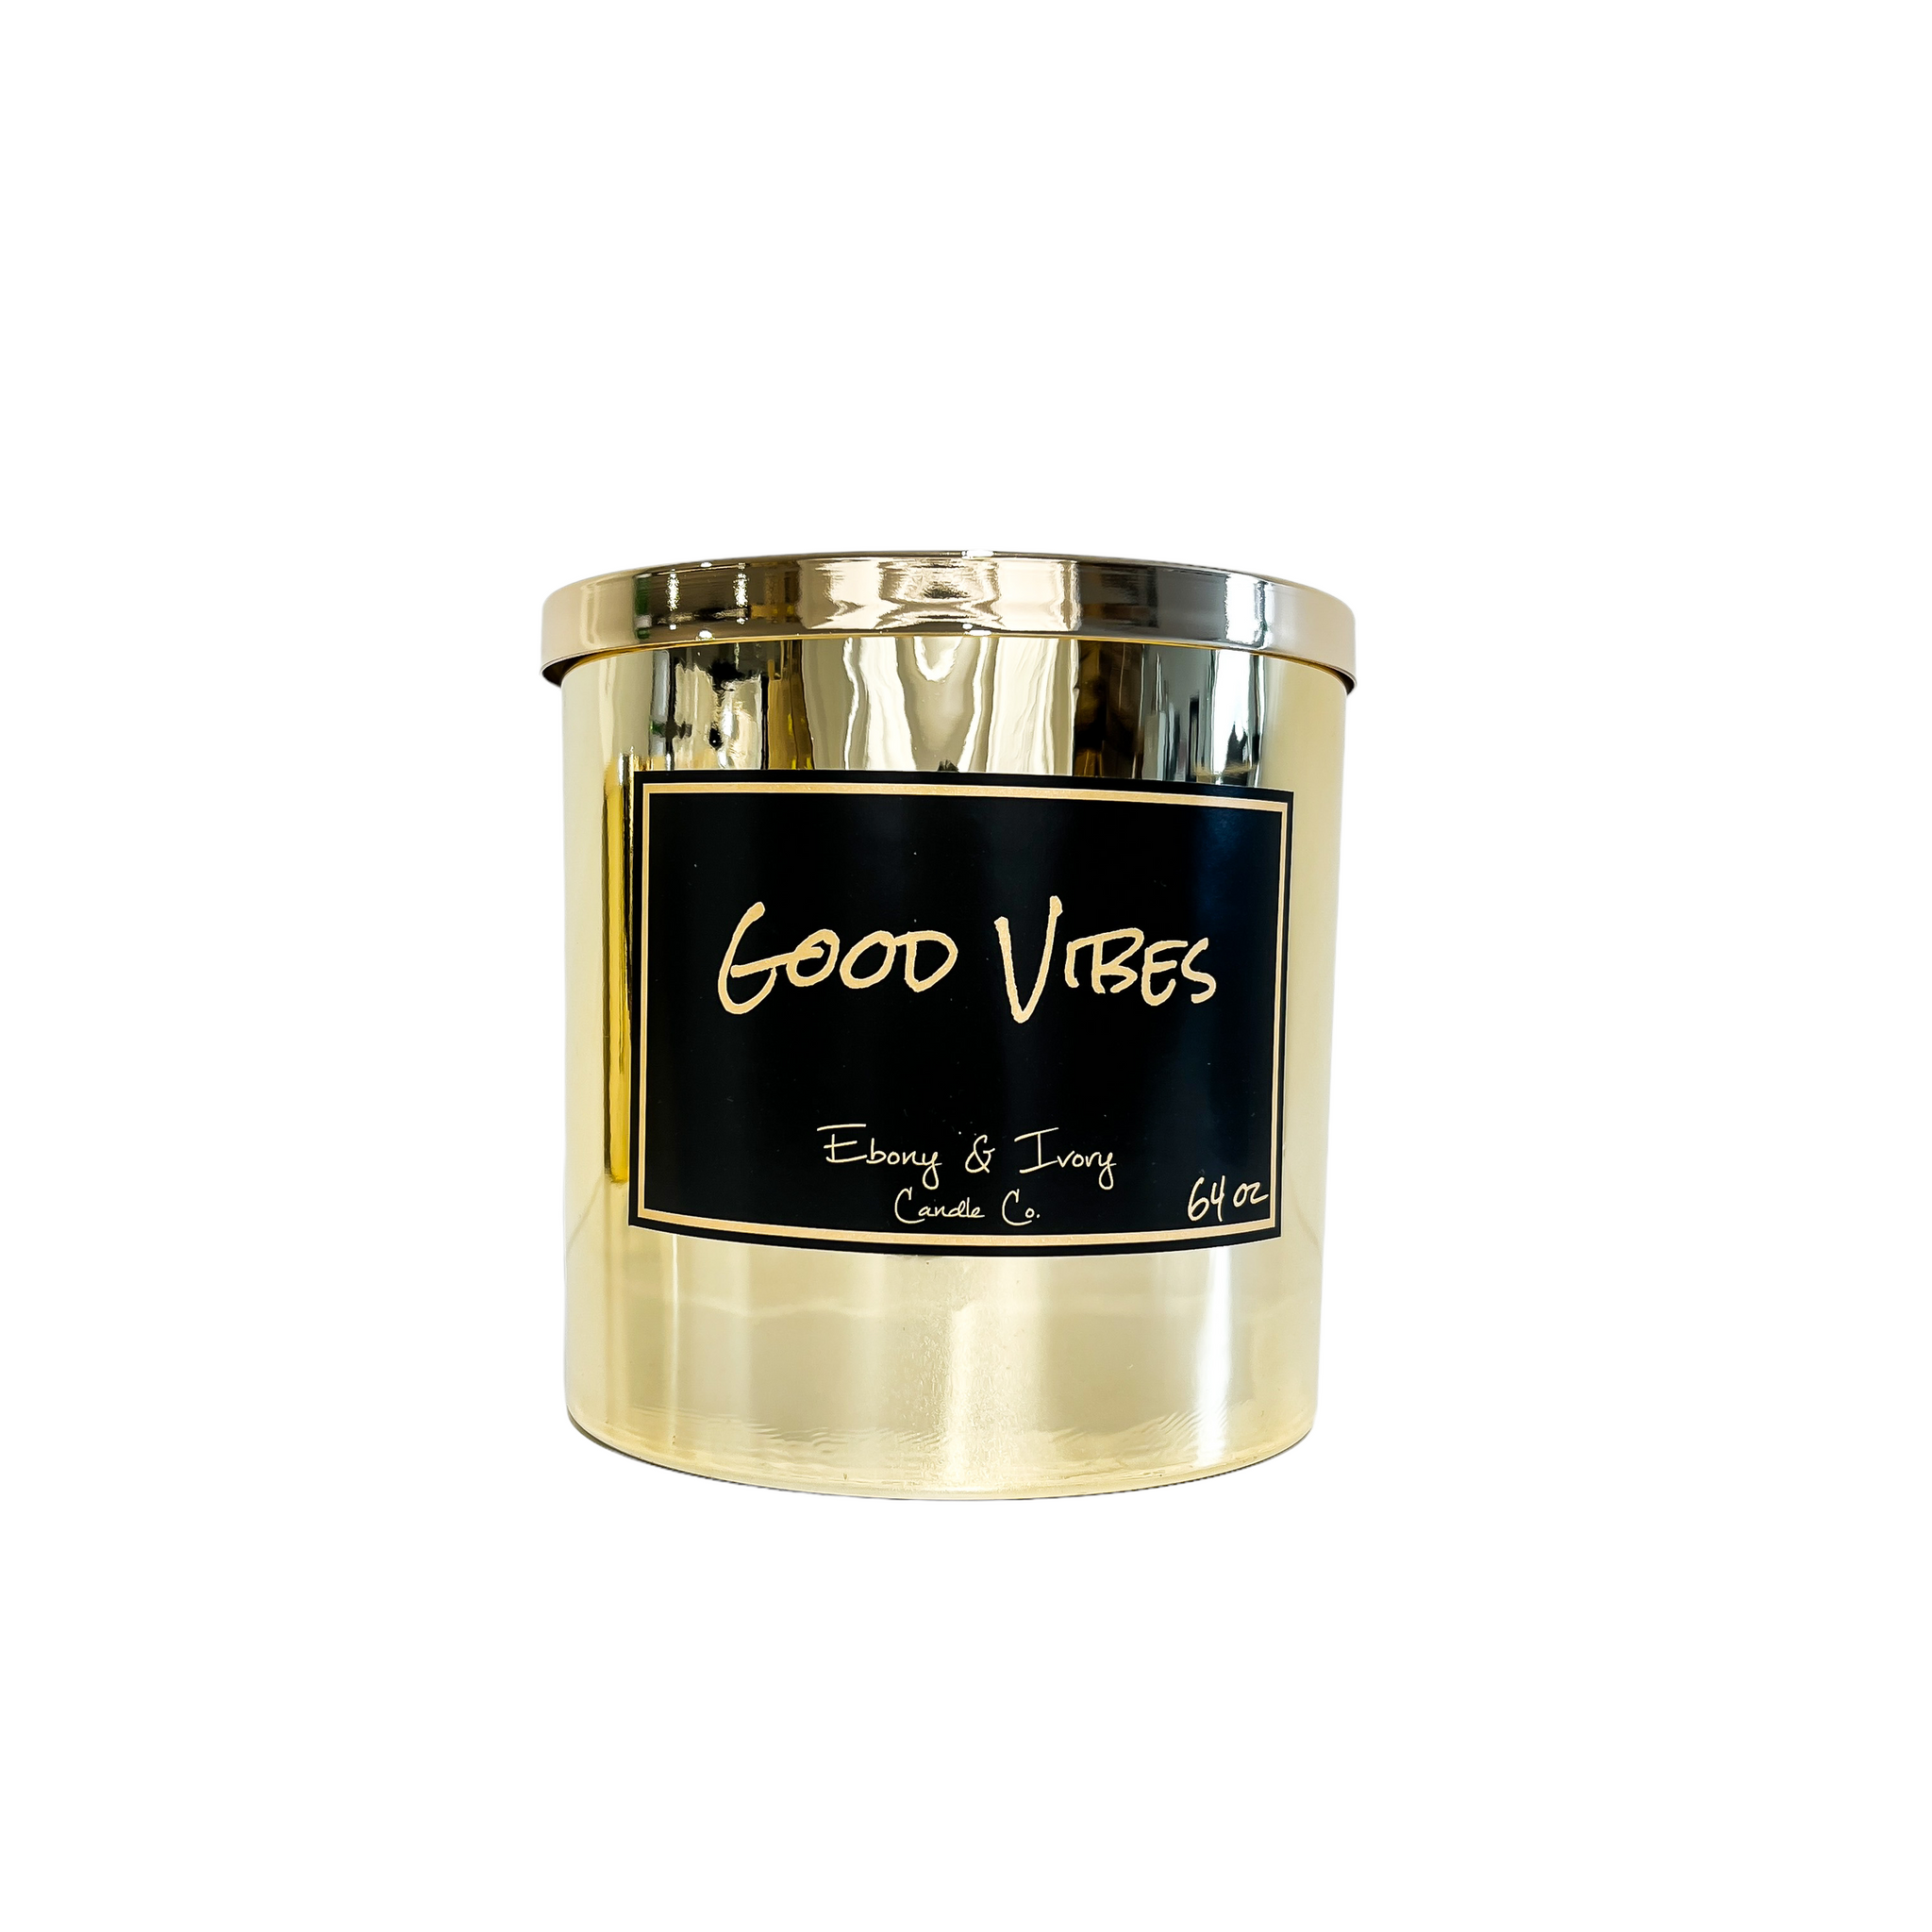 Gold, sixty four ounce, Pomegranate and Marshmallow scented soy wax candle with a gold lid and a black label that reads Good Vibes